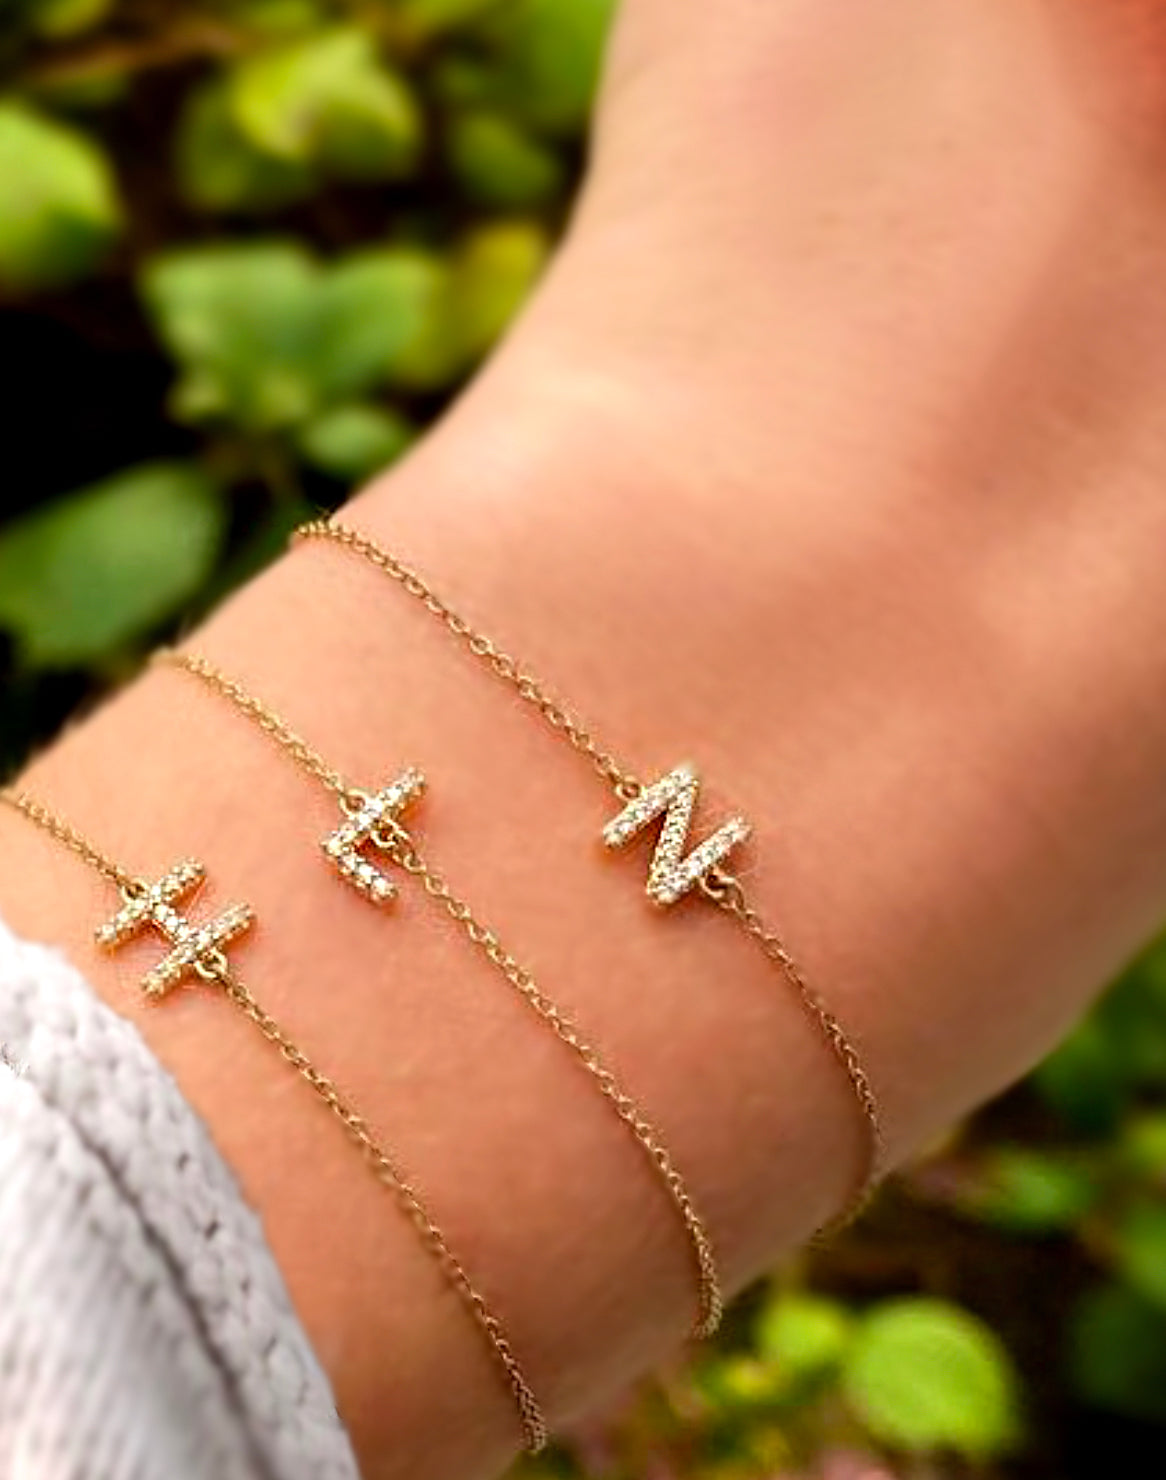 Delicate Pave Diamond Initial Letter Bracelet - 14K Solid White or Yel –  Abrau Jewelry